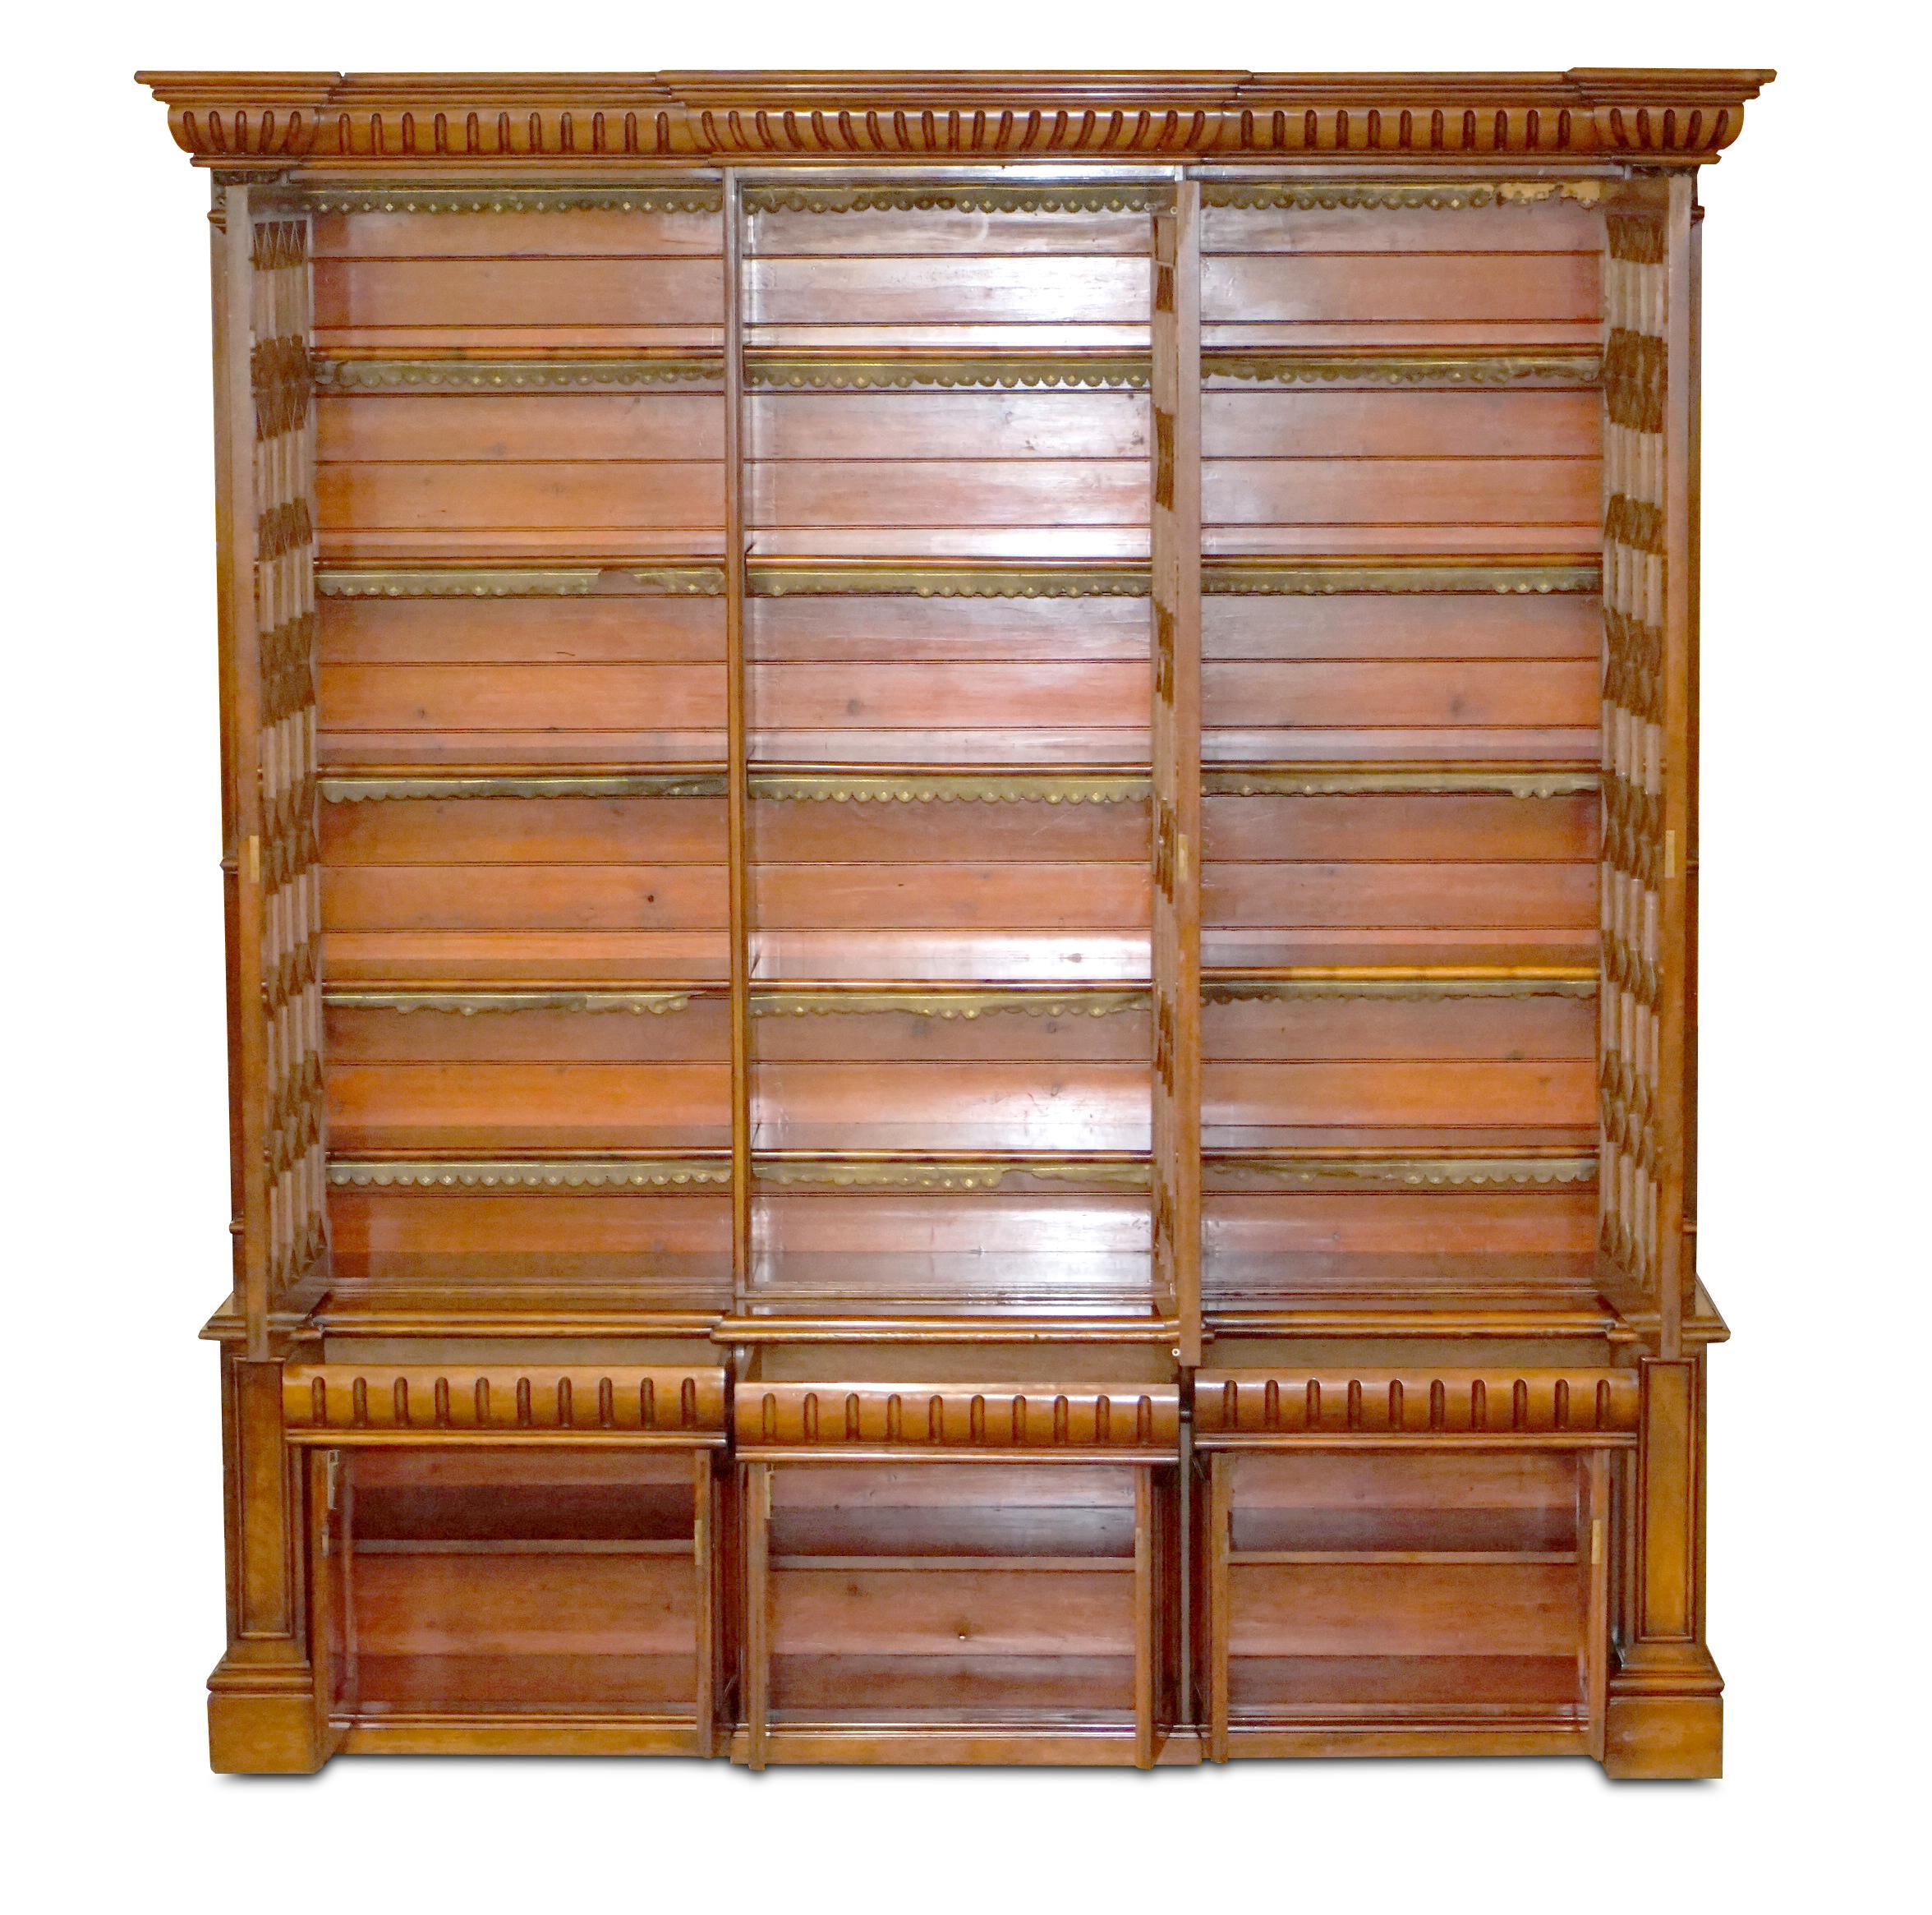 Mid-19th Century Monumental Tall Antique Victorian Hardwood Astral Glazed Bookcase For Sale